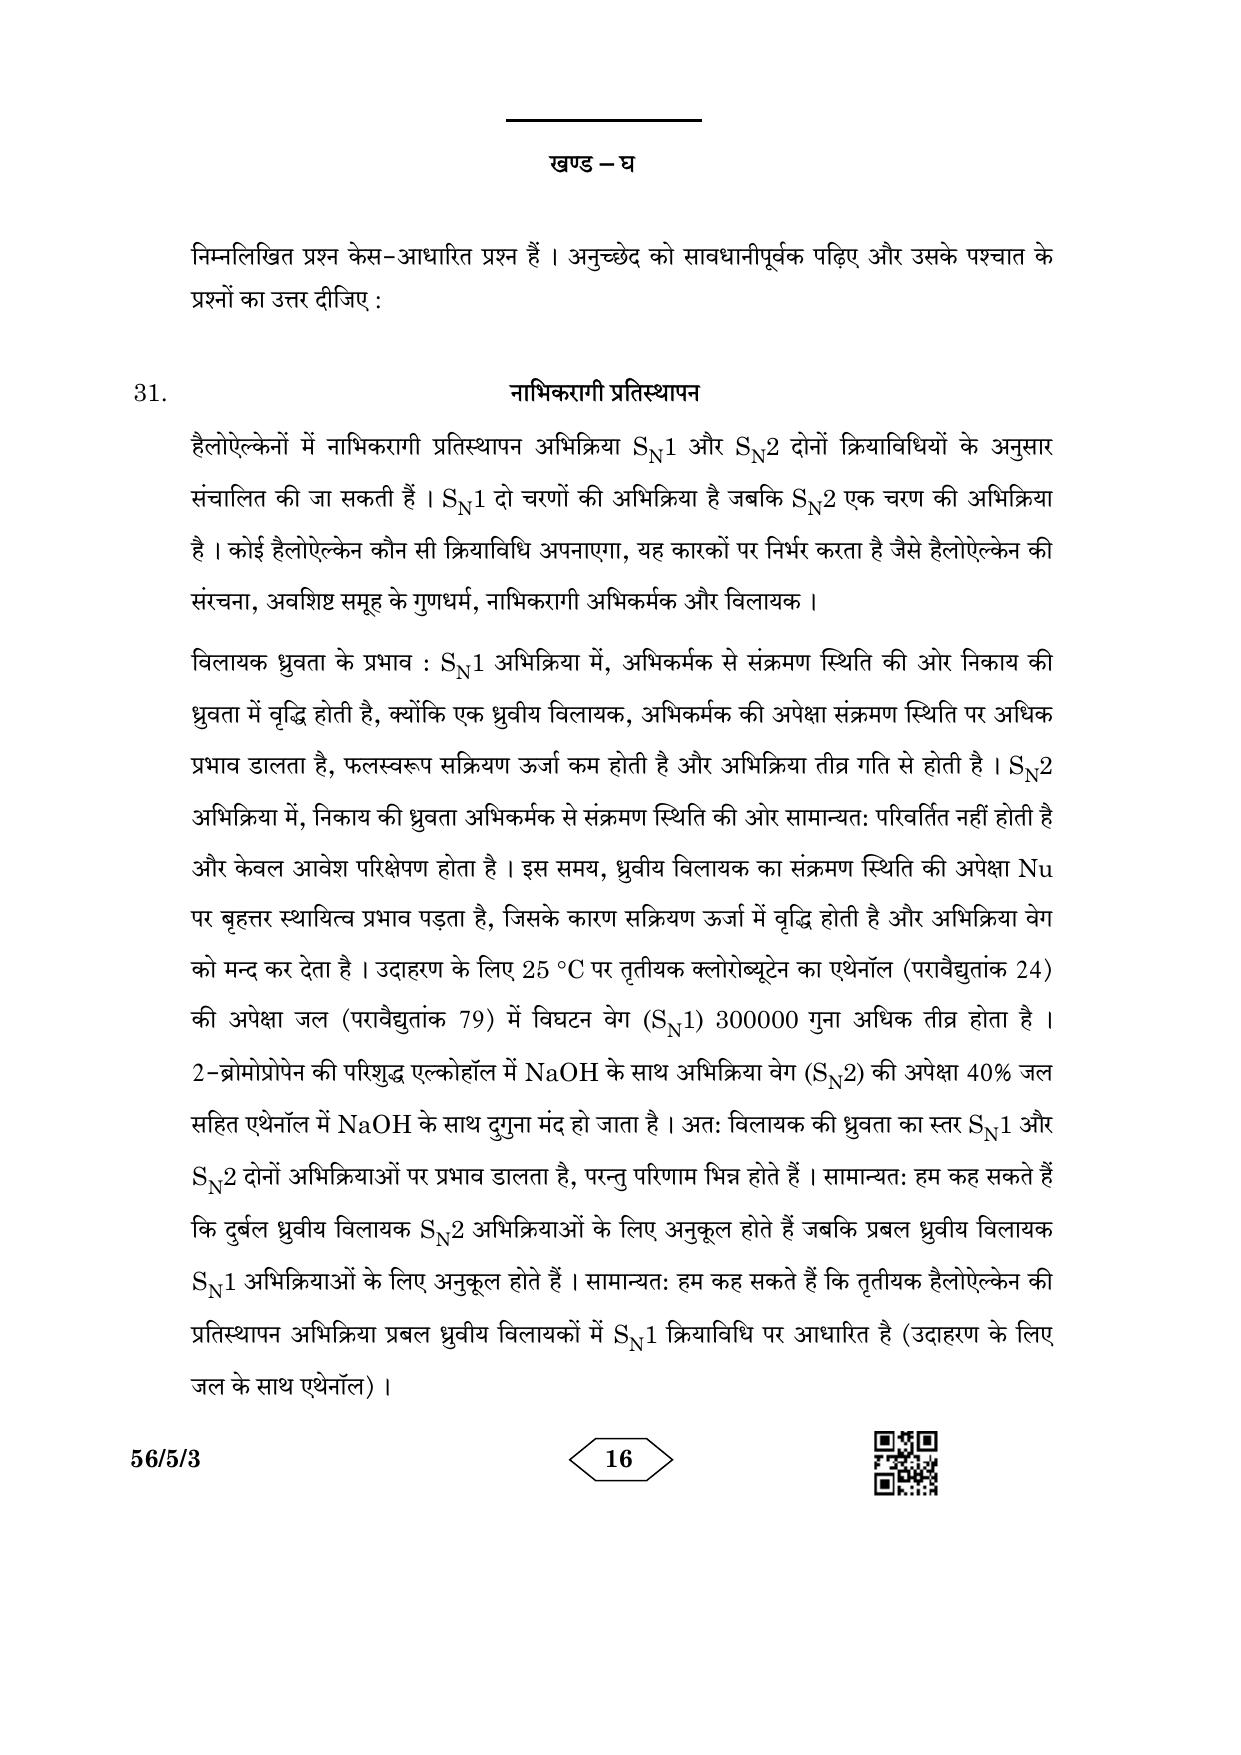 CBSE Class 12 56-5-3 Chemistry 2023 Question Paper - Page 16